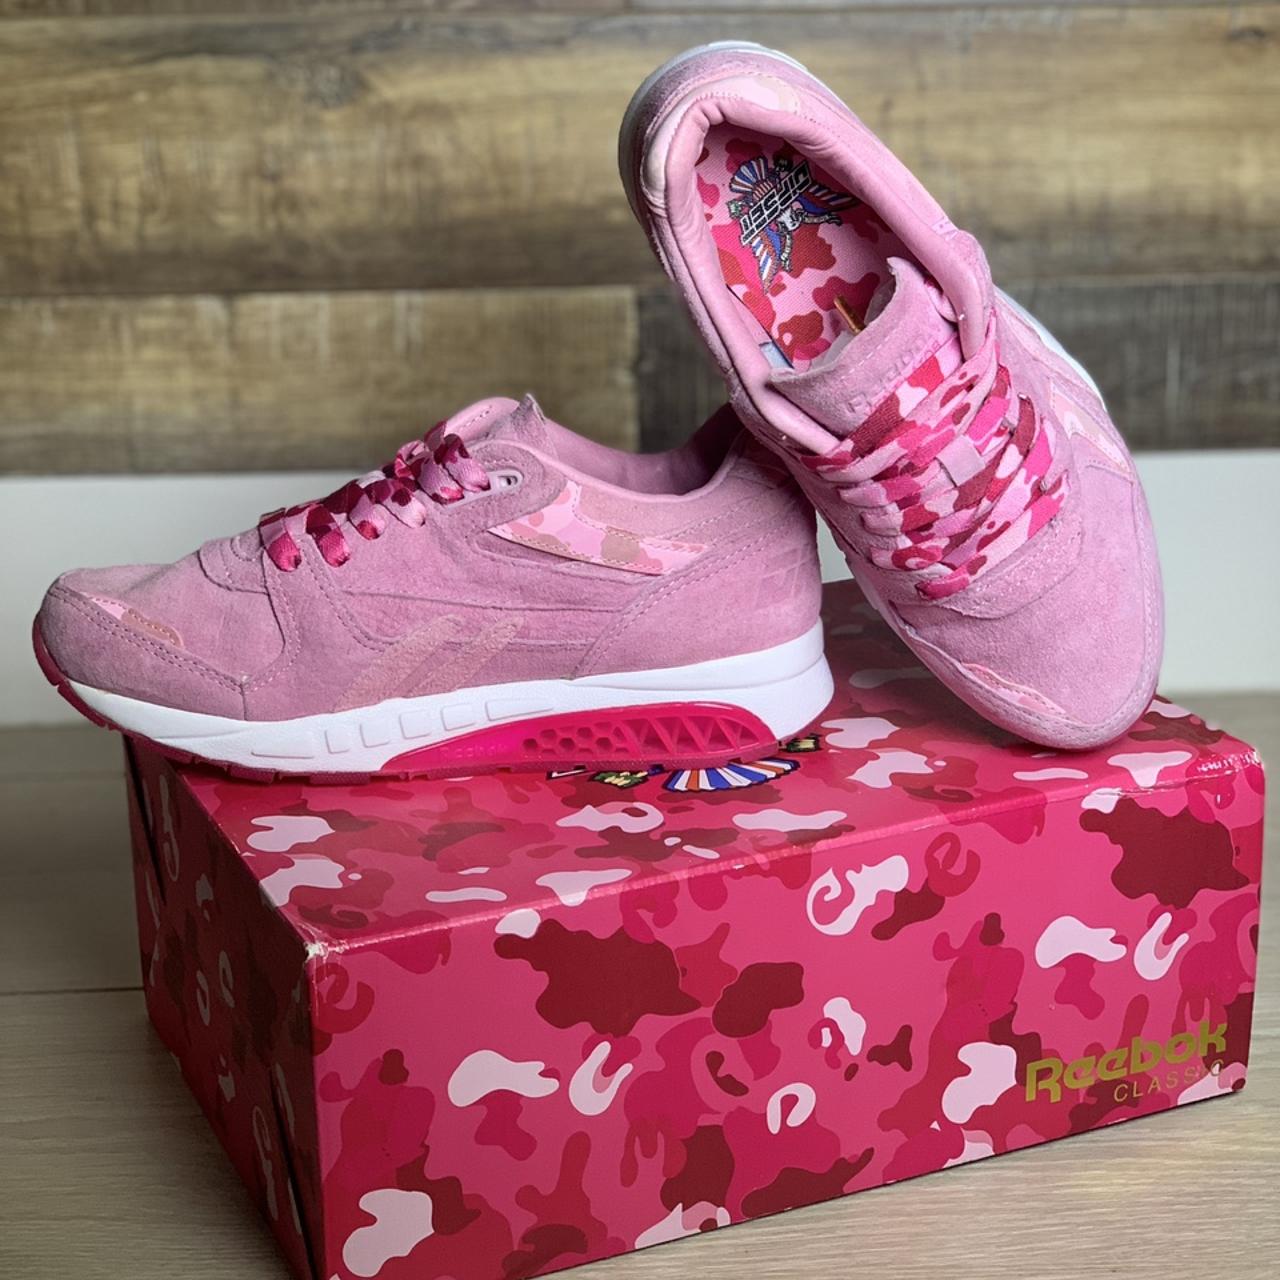 Reebok Women's Pink and White Trainers (4)